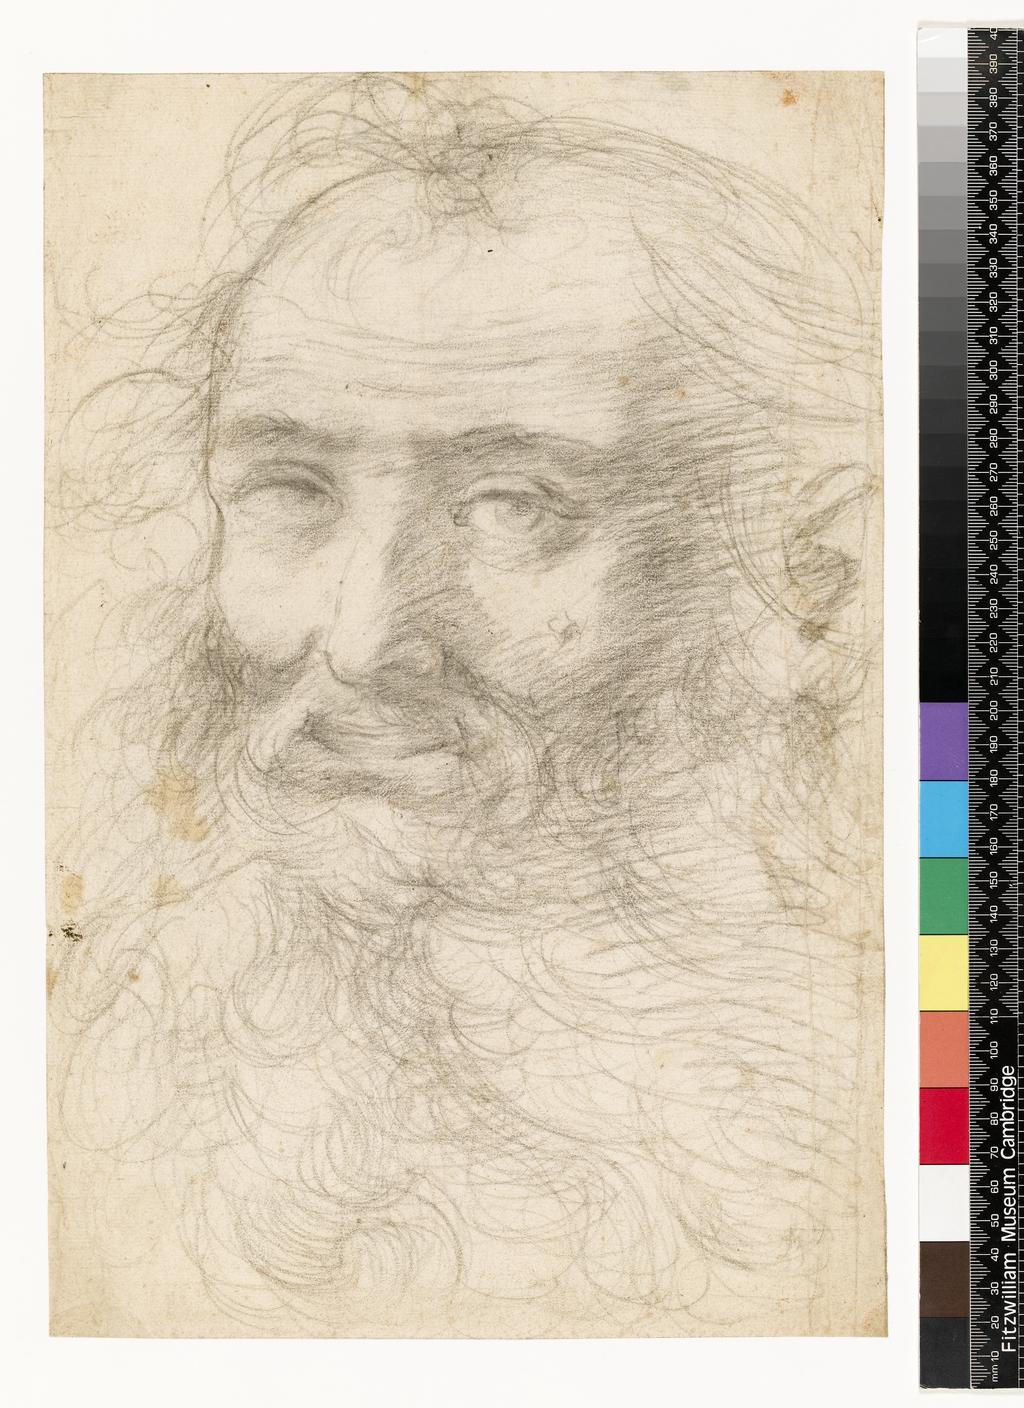 An image of Title/s: Head of a bearded man 
Maker/s: Procaccini, Camillo attributed to (draughtsman) [ULAN info: Italian artist, 1551(?)-1629]
Technique Description: black chalk on paper 
Dimensions: height: 375 mm, width: 247 mm

 

 
